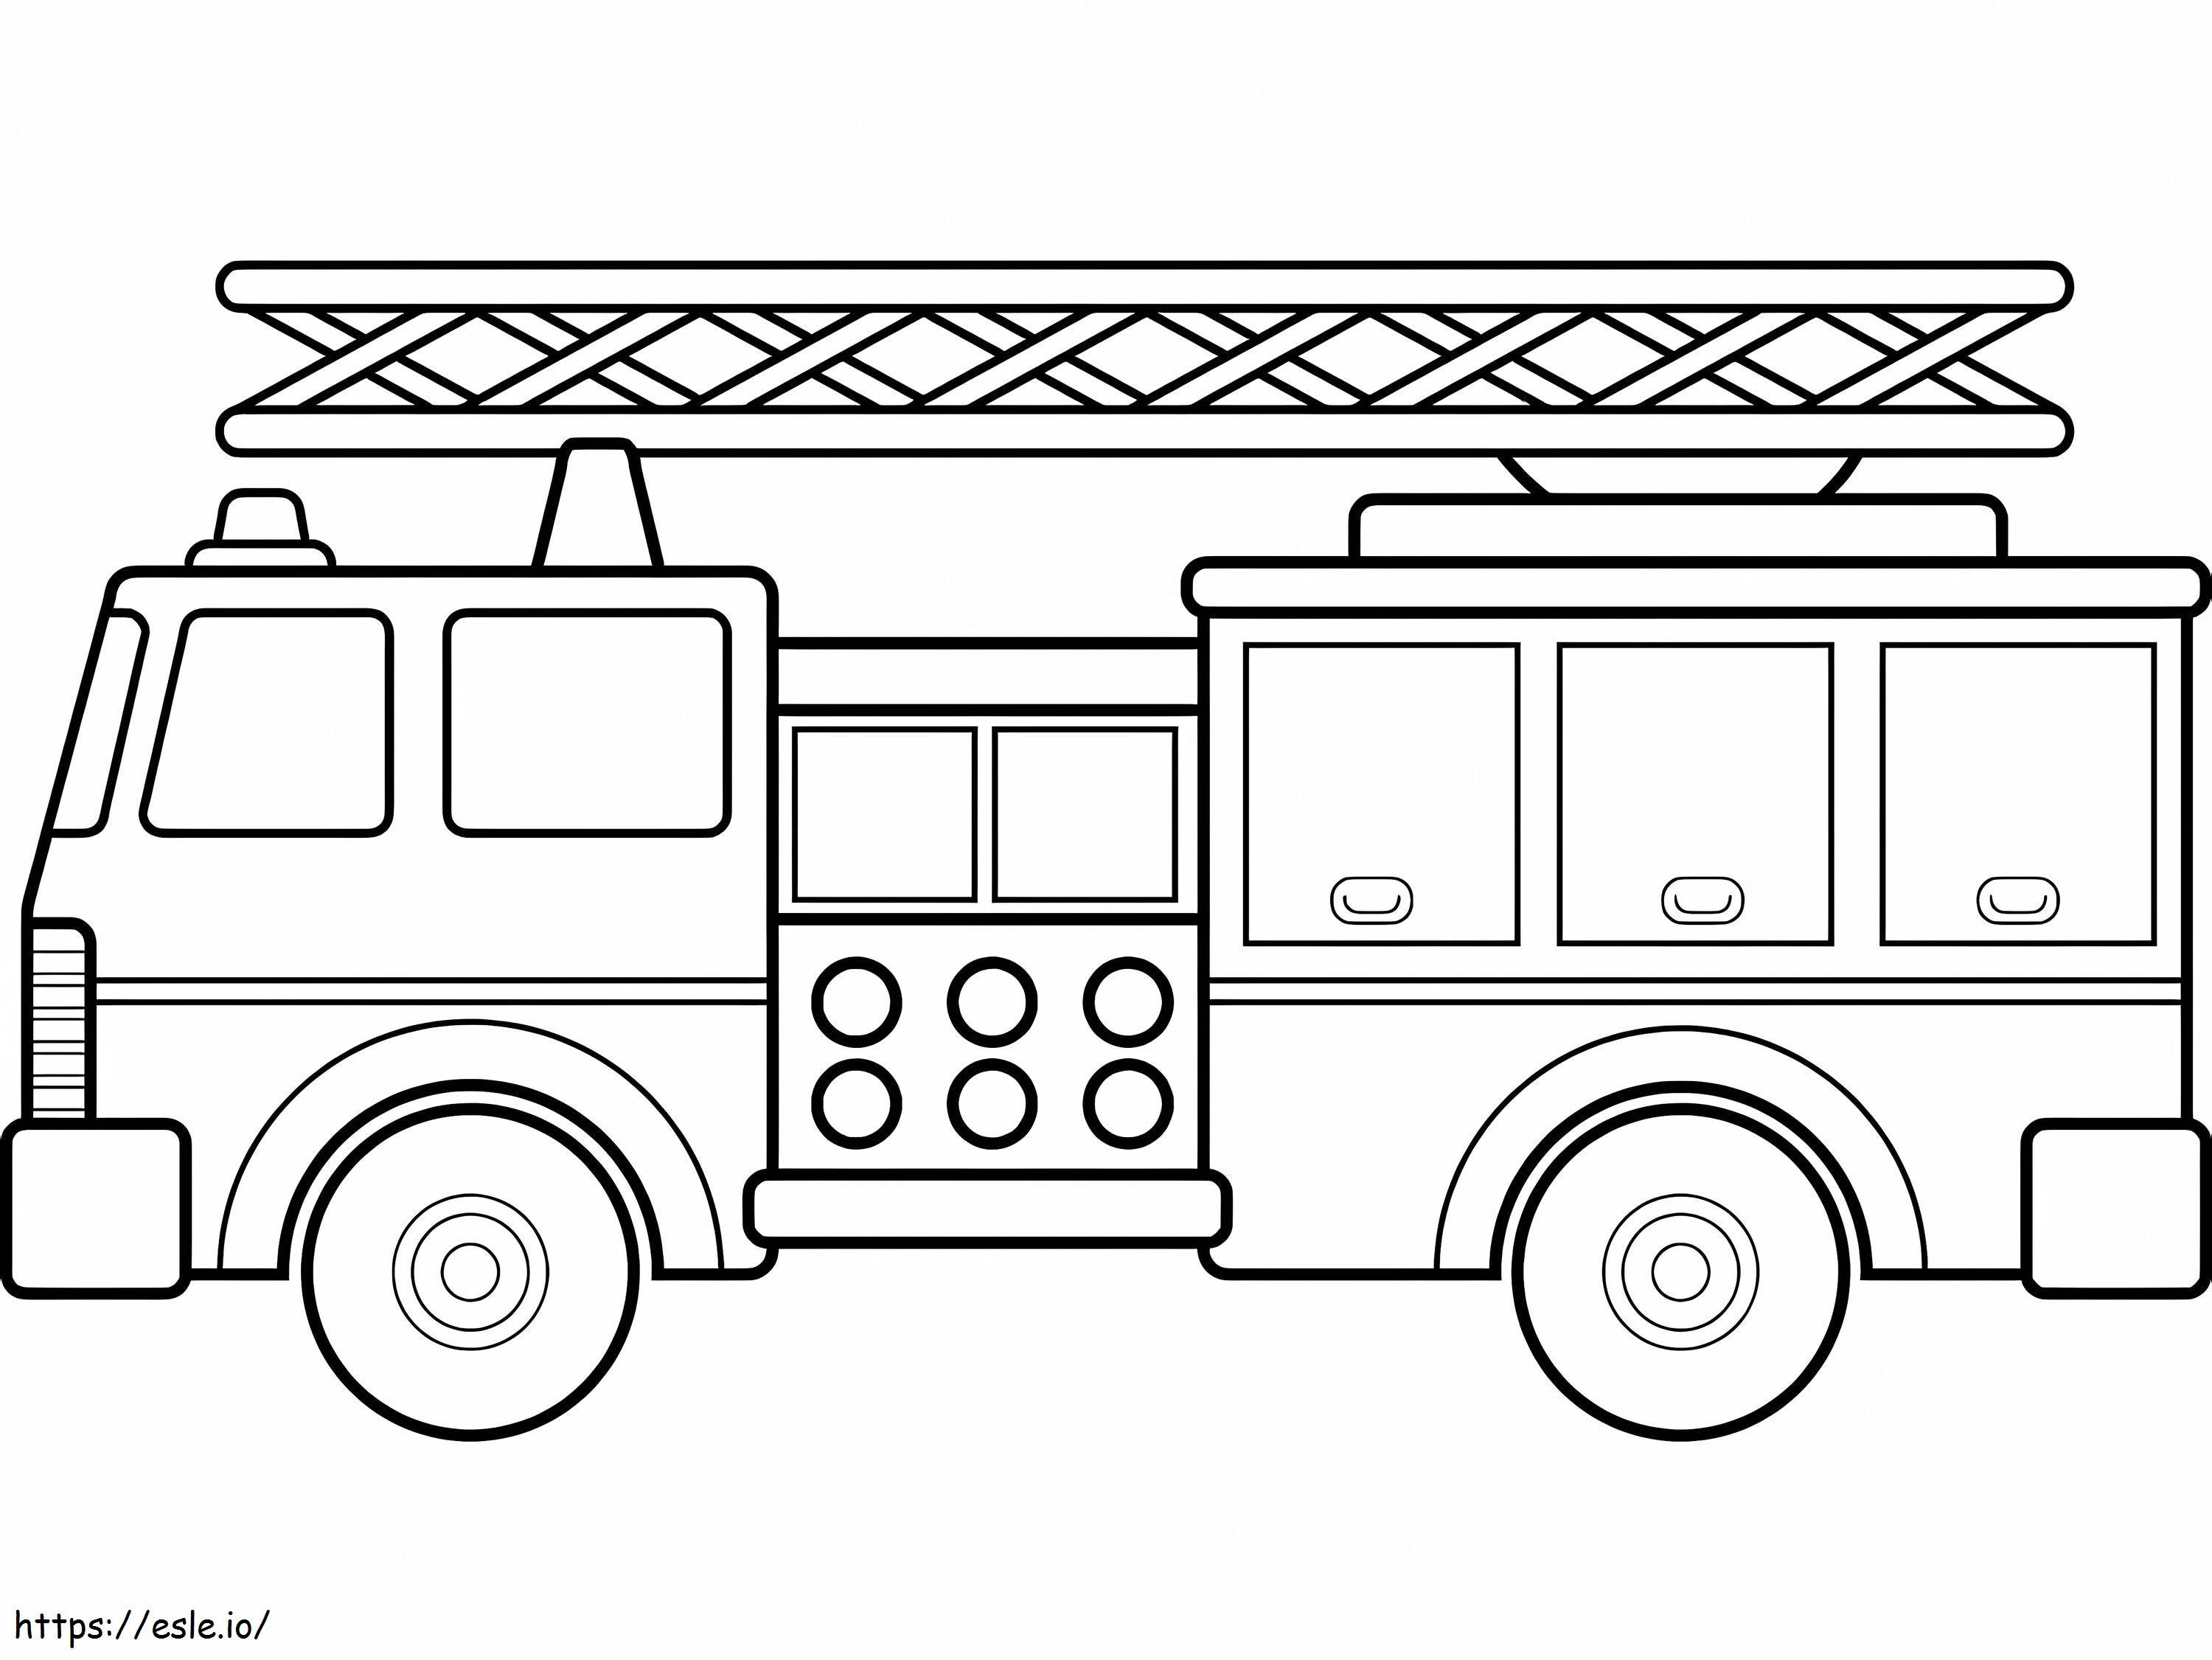 Single Fire Truck 1 coloring page